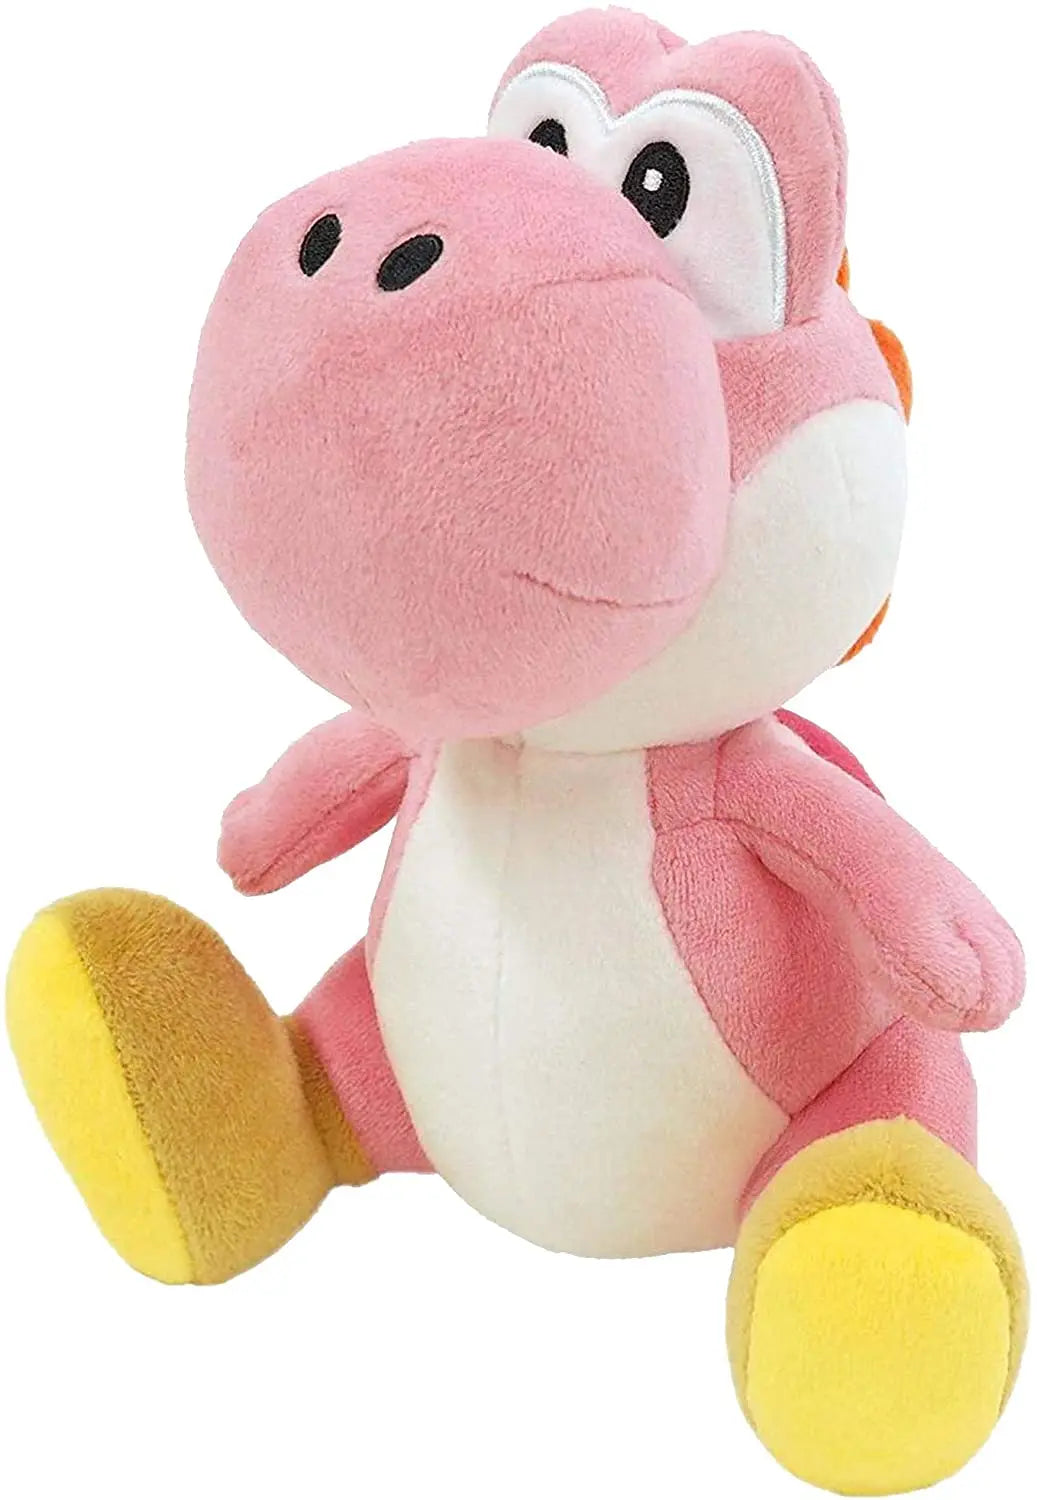 Little Buddy Super Mario All Star Collection 7" Pink Yoshi Plush King Gaming